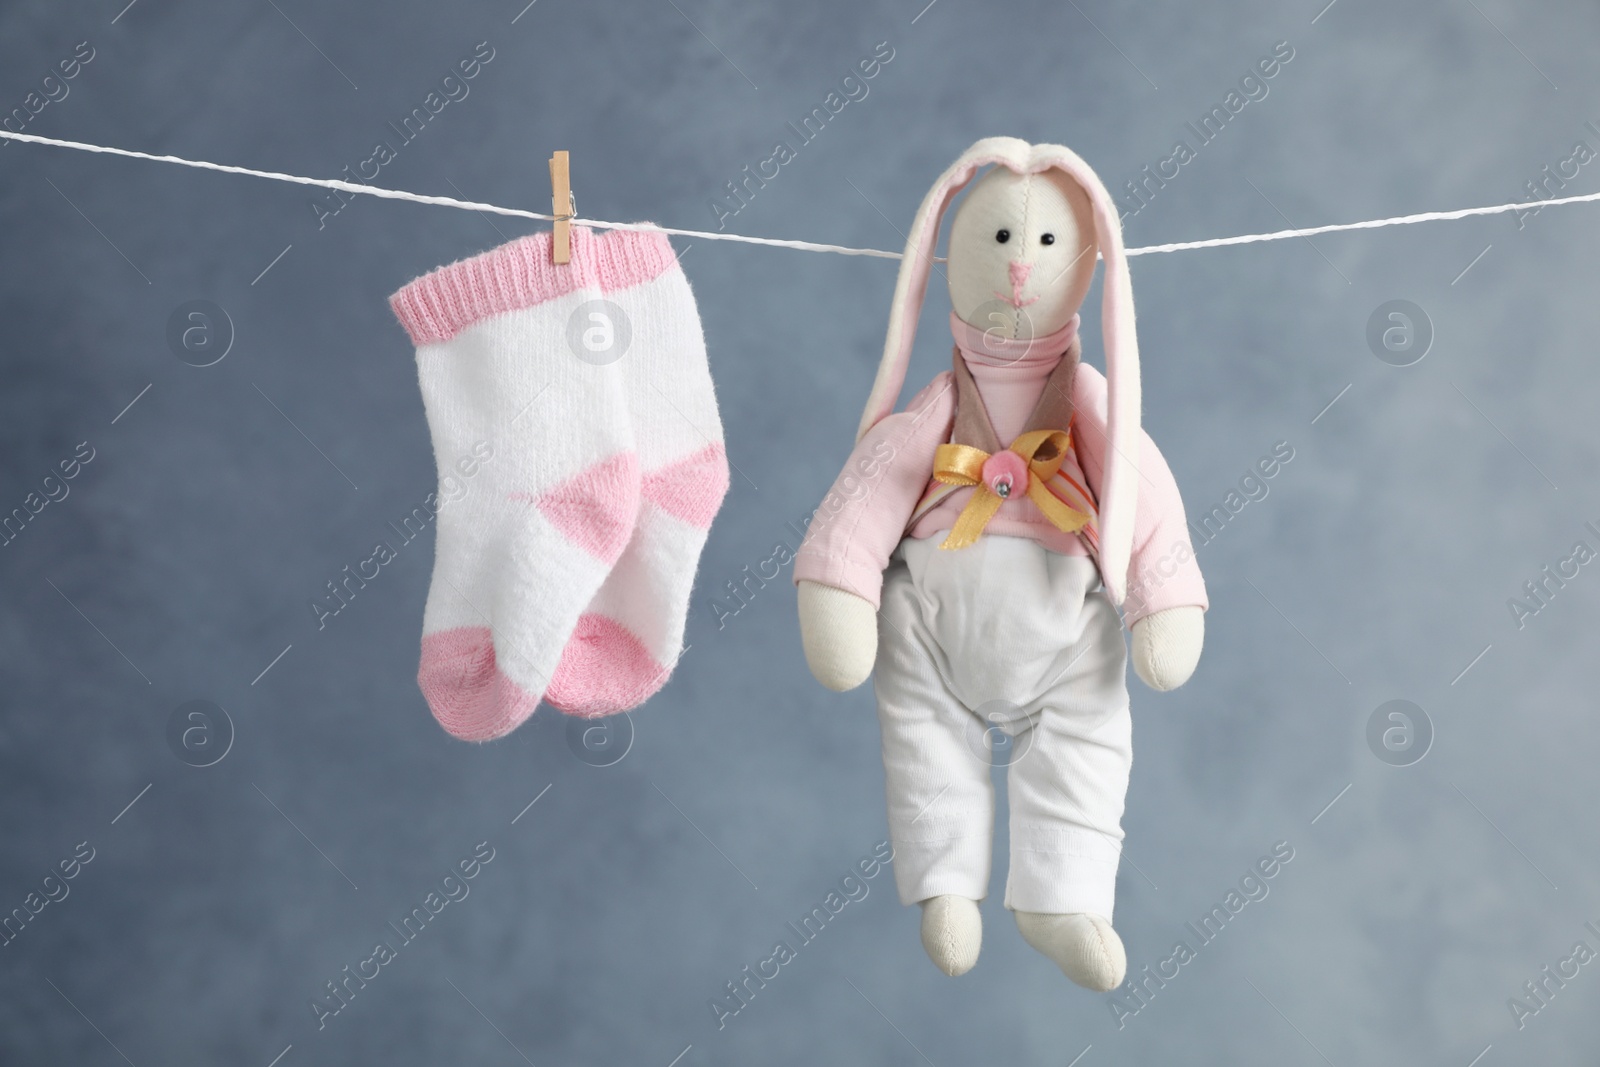 Photo of Pair of child's socks and toy bunny hanging on laundry line against dark background